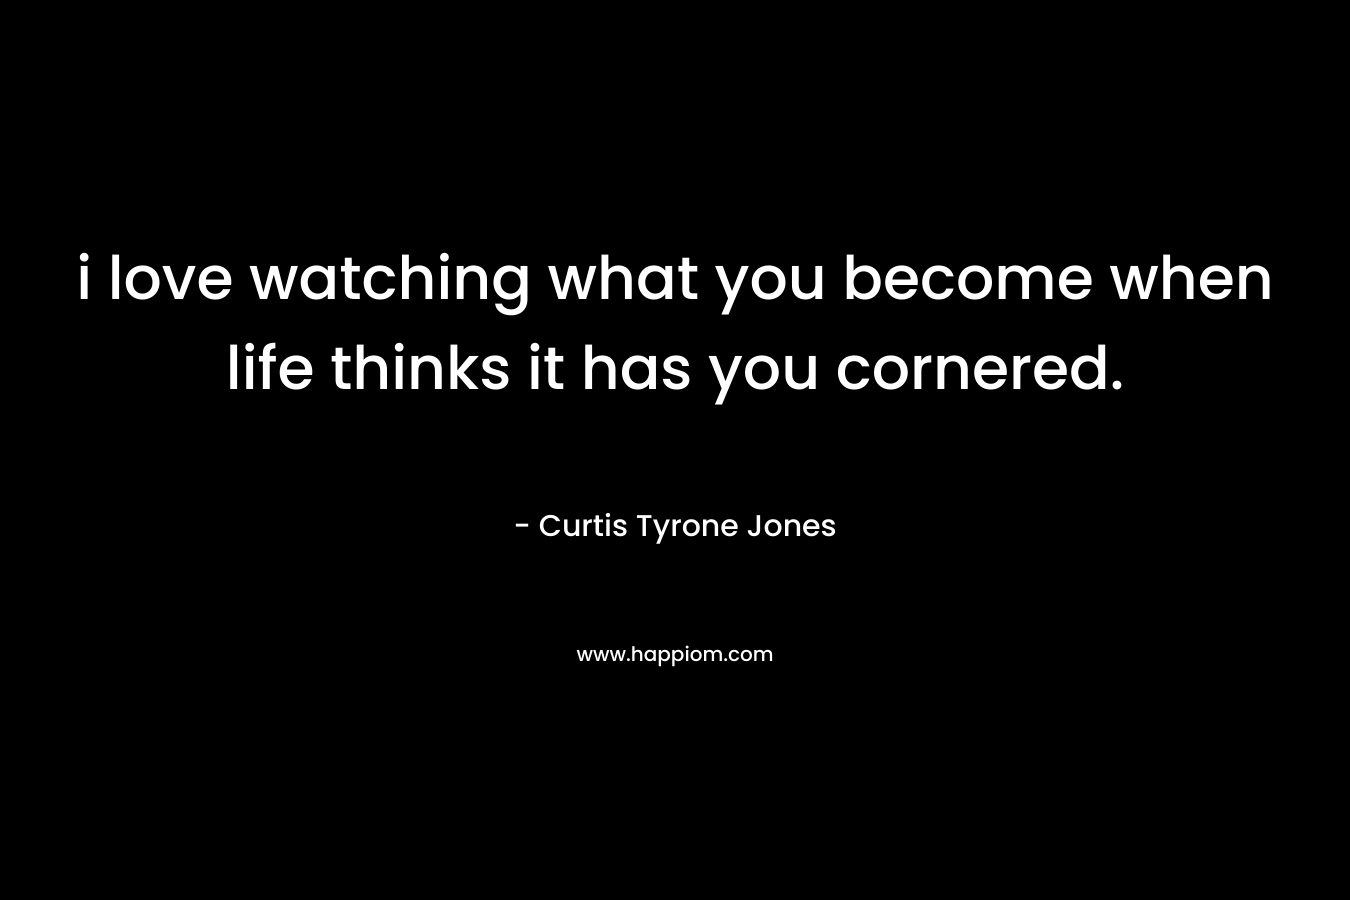 i love watching what you become when life thinks it has you cornered.